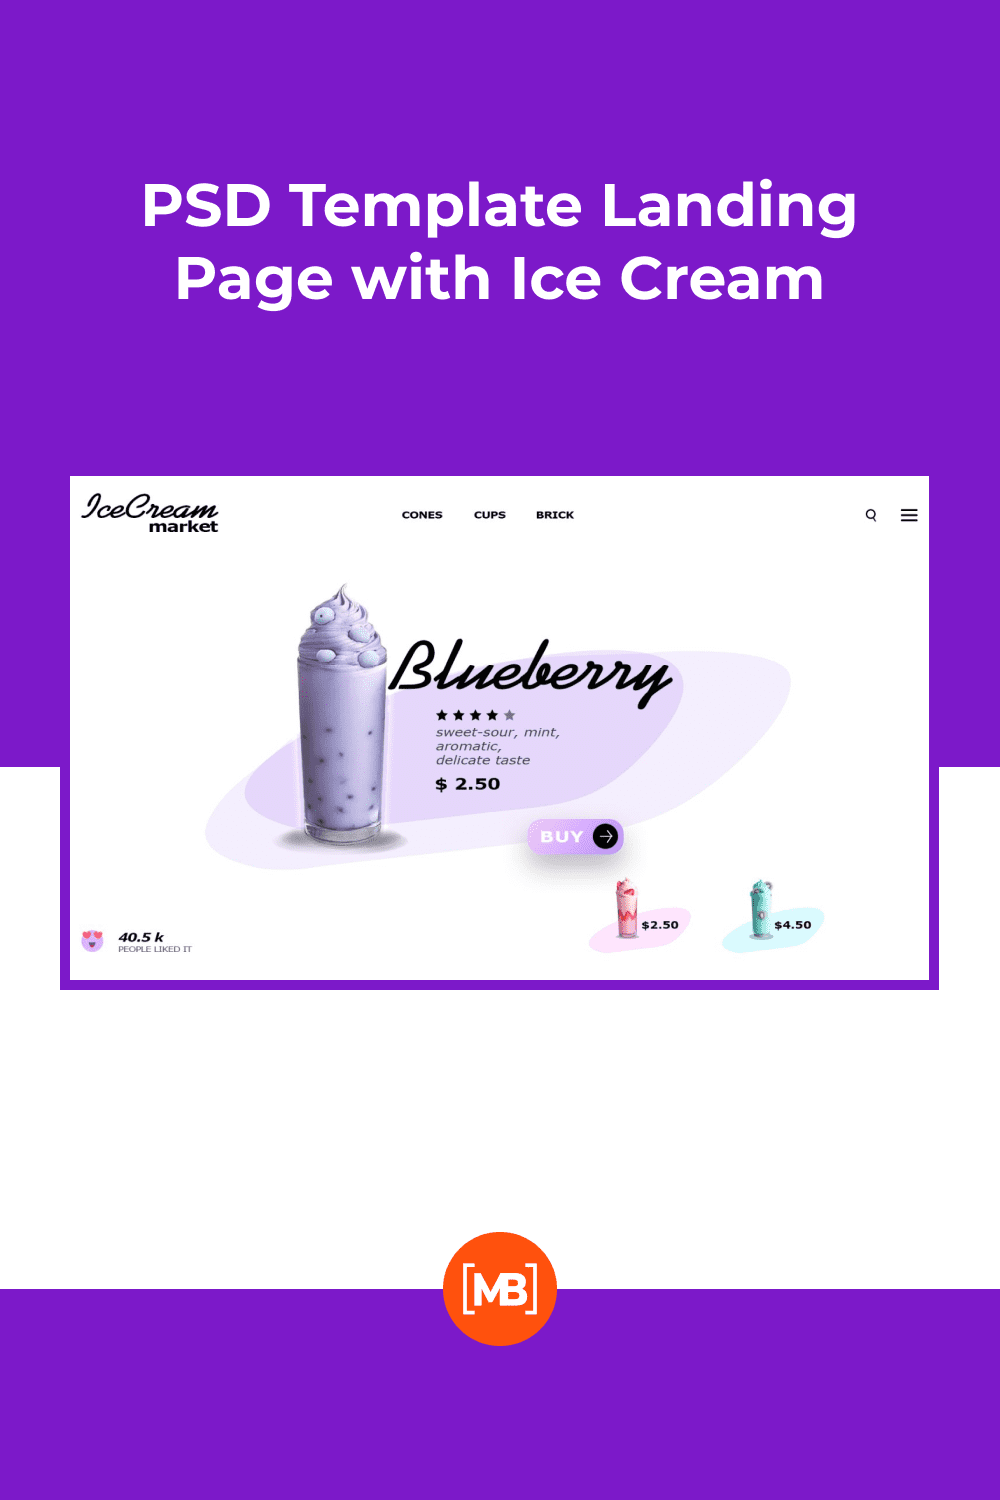 PSD Template Landing Page with Ice Cream - MasterBundles - Pinterest Collage Image.